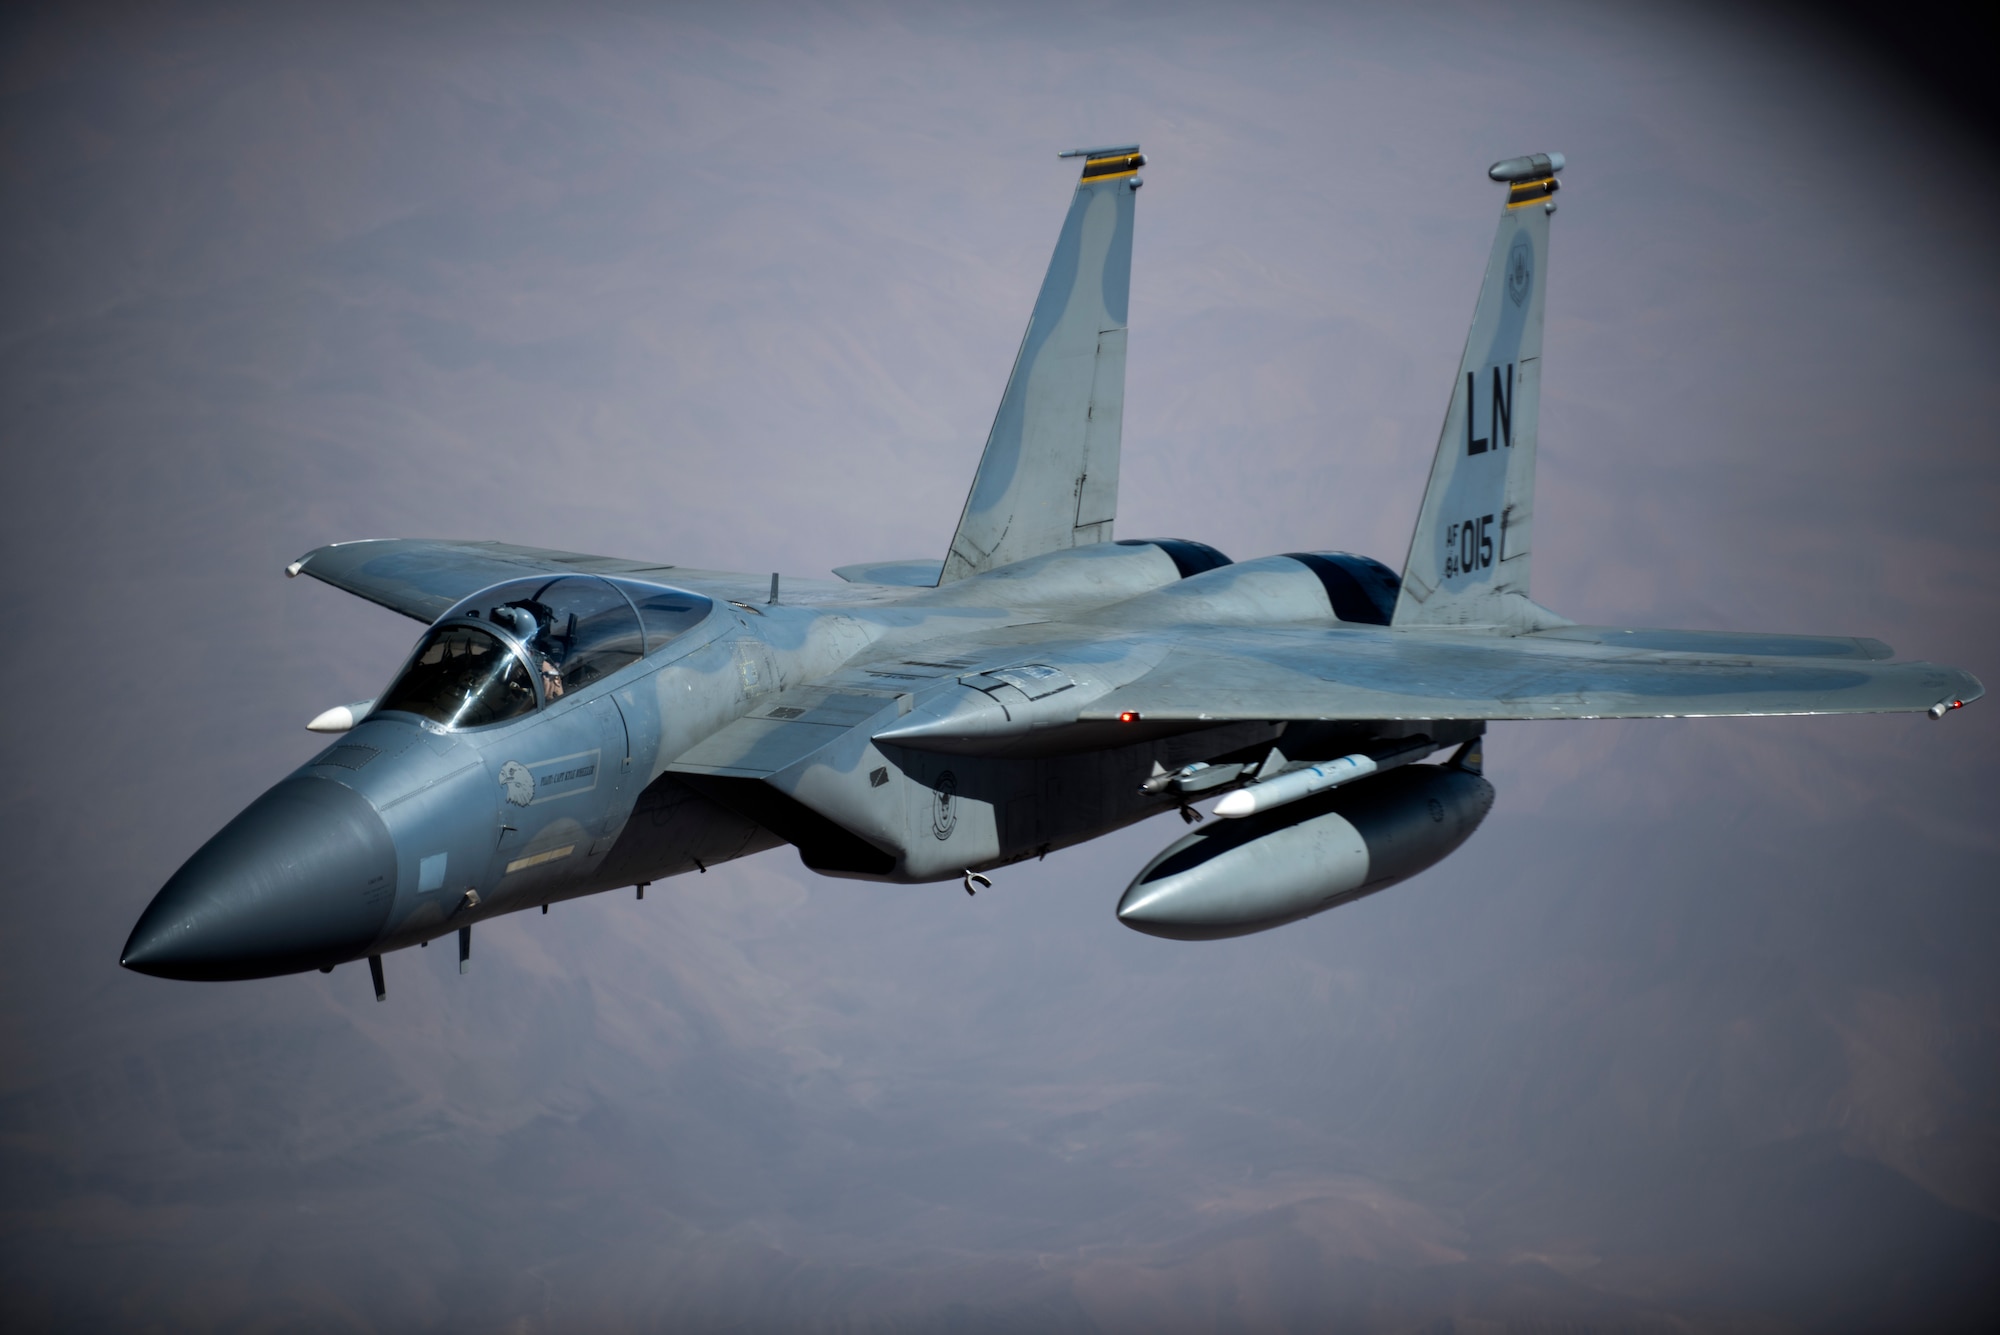 An F-15C Eagles assigned to the 493rd Fighter Squadron flies above Morocco during Exercise African Lion April 20, 2018. Various units from the U.S. Armed Forces will conduct multilateral and stability operations training with units from the Royal Moroccan Armed Forces in the Kingdom of Morocco. This combined multilateral exercise is designed to improve interoperability and mutual understanding of each nation’s tactics, techniques and procedures while demonstrating the strong bond between the nation’s militaries. (U.S. Air Force photo/Senior Airman Malcolm Mayfield)